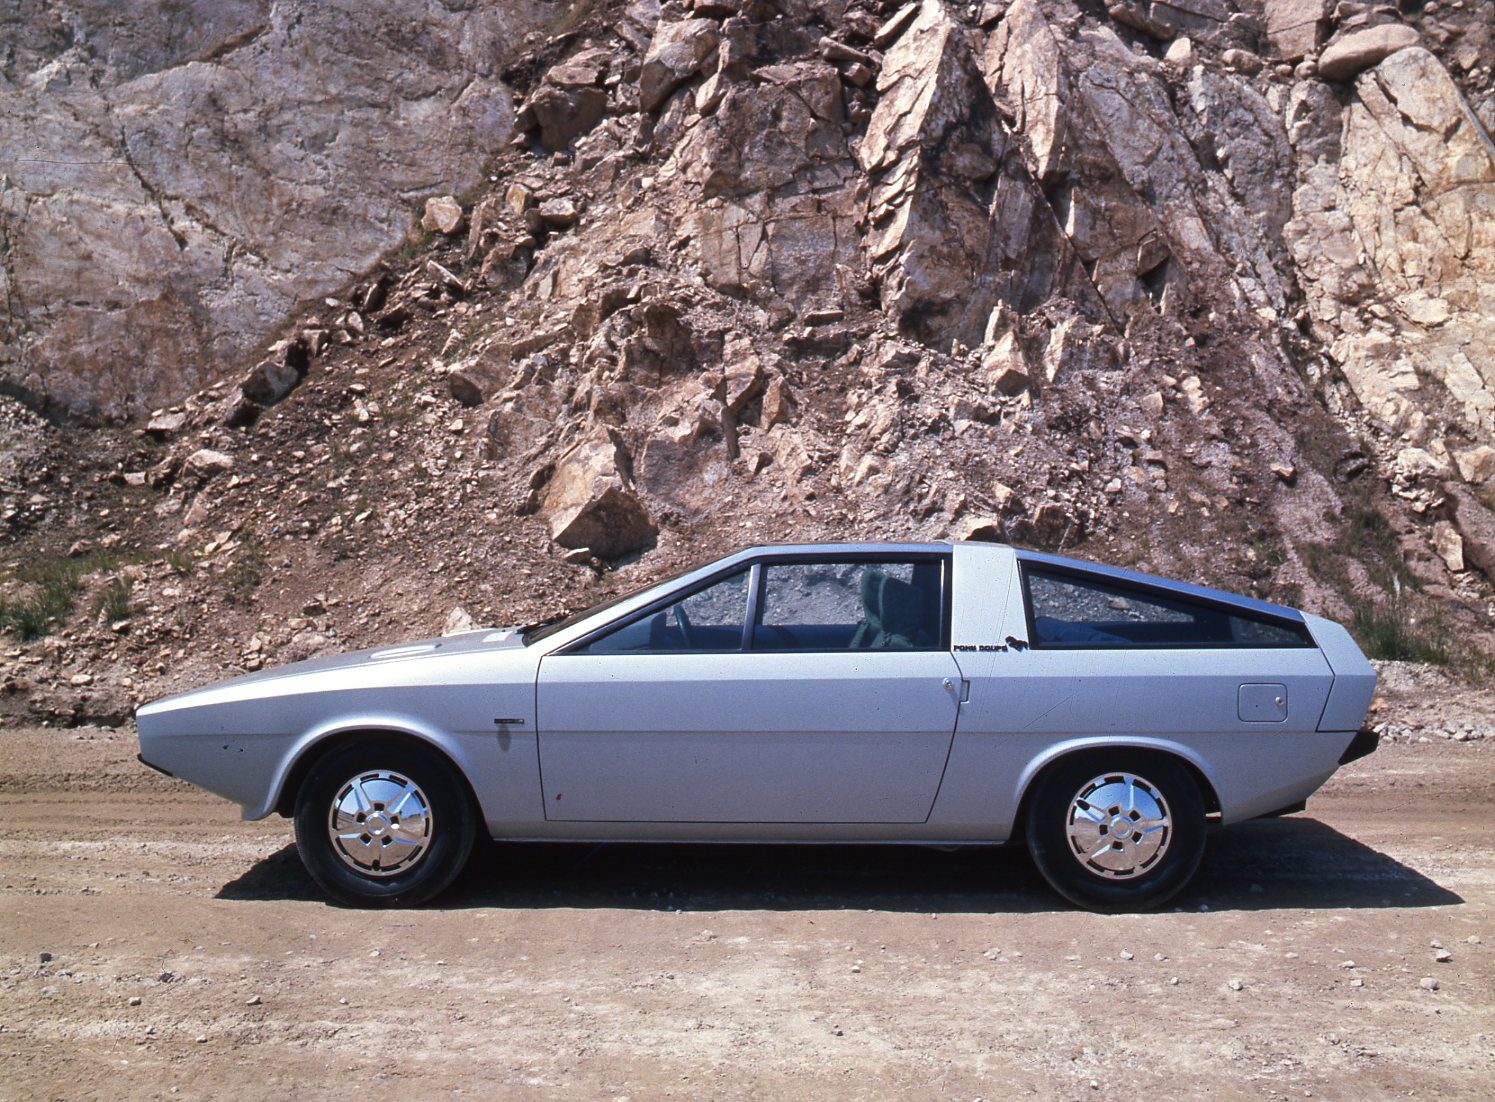 Hyundai, GFG Style to Collaborate on 1974 Pony Coupe Concept Rebuild | THE SHOP